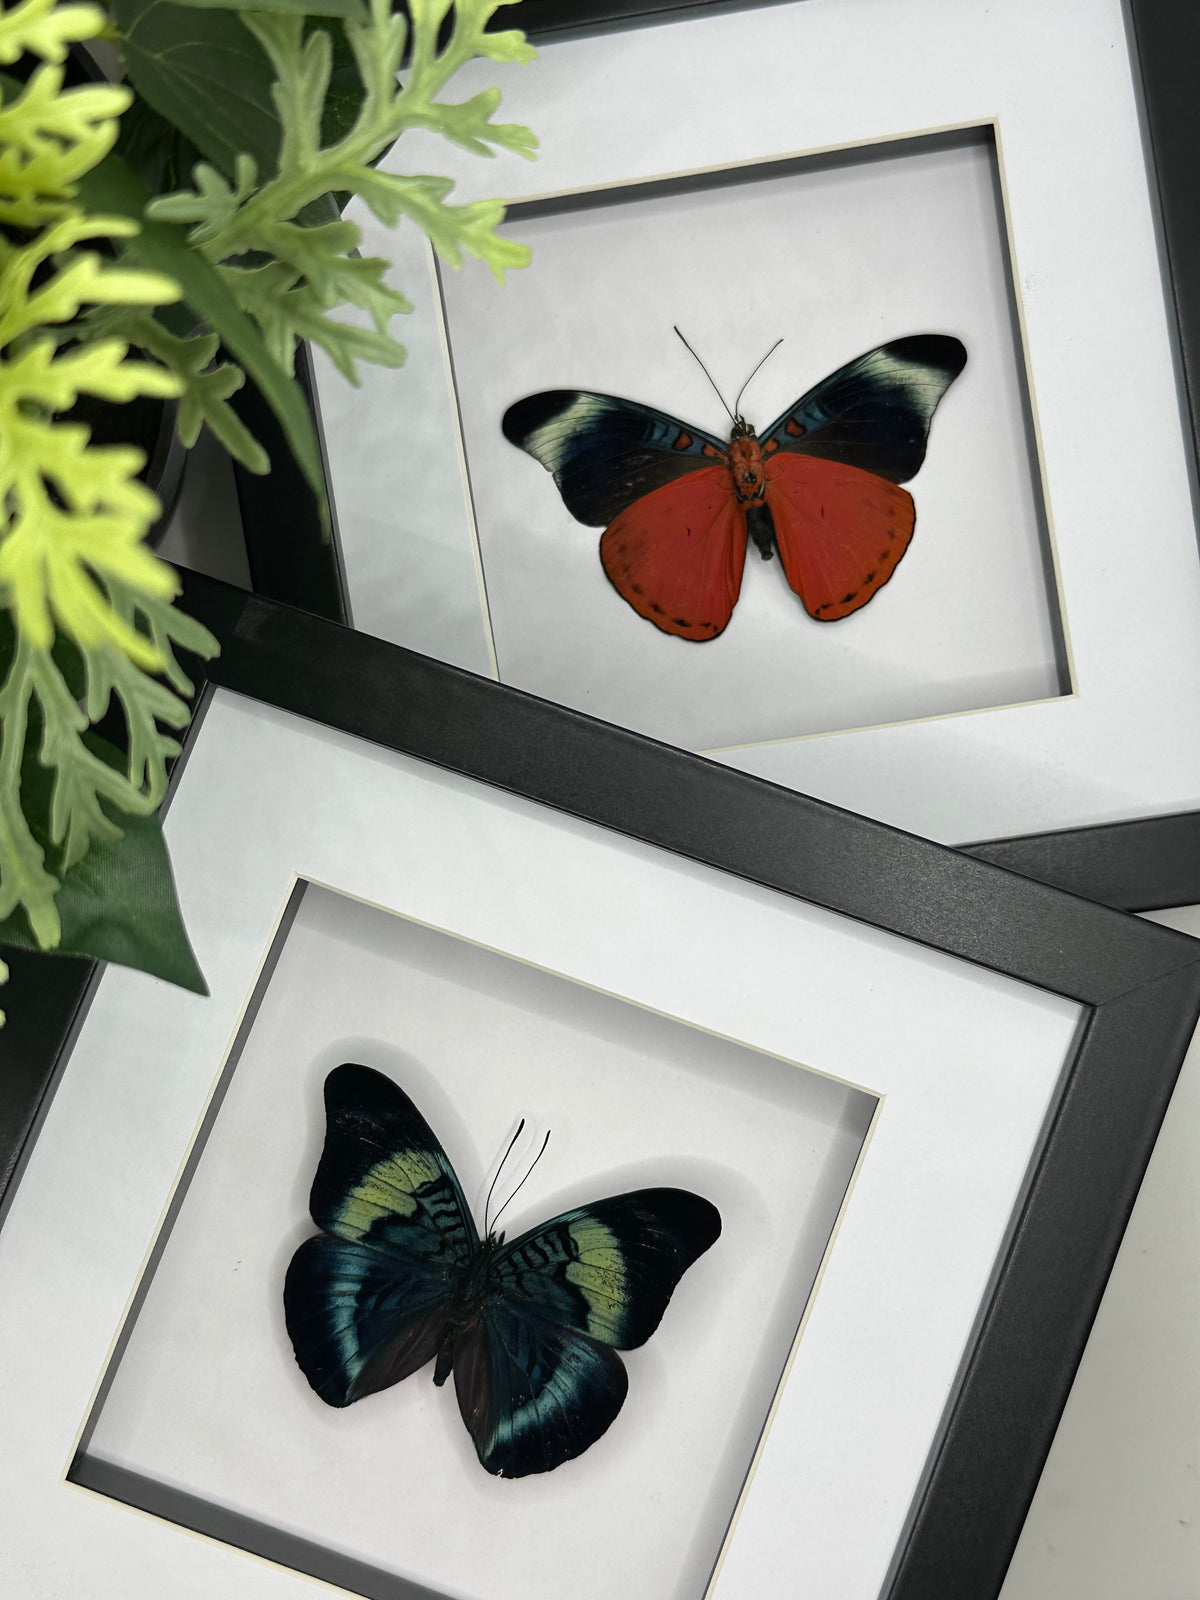 Red Flasher Butterfly / Panacea Prola in a square frame